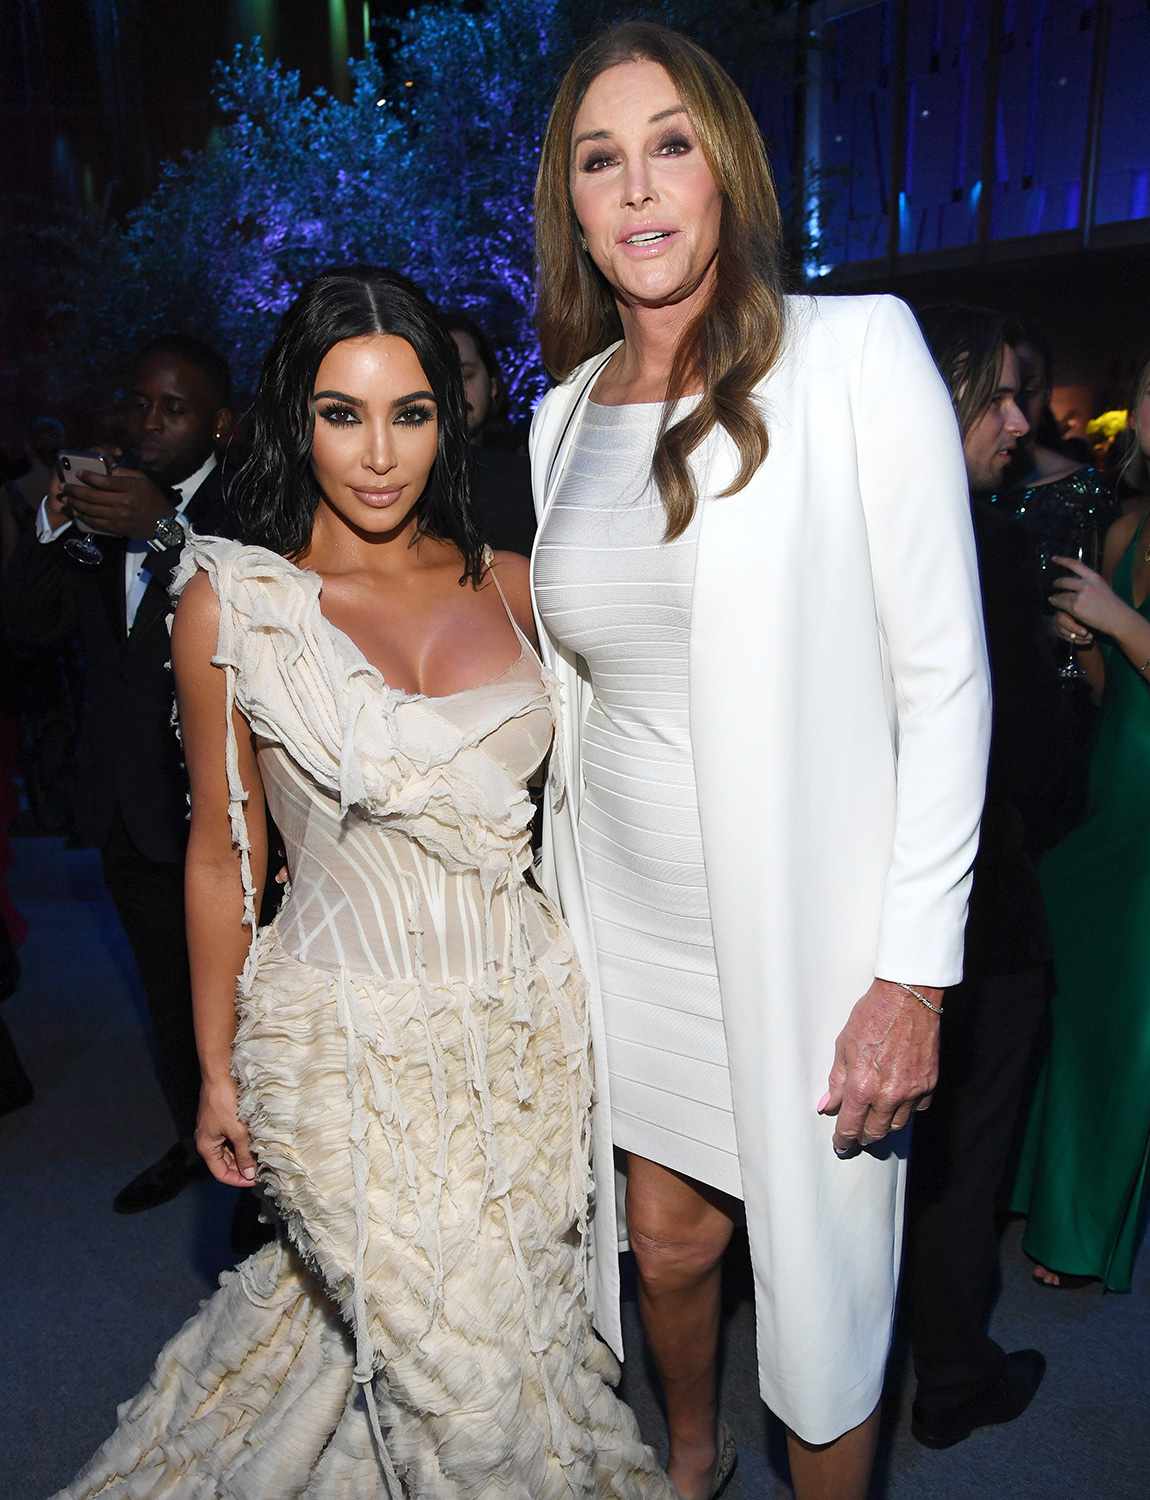 Kim Kardashian West and Caitlyn Jenner attend the 2020 Vanity Fair Oscar Party hosted by Radhika Jones at Wallis Annenberg Center for the Performing Arts on February 09, 2020 in Beverly Hills, California